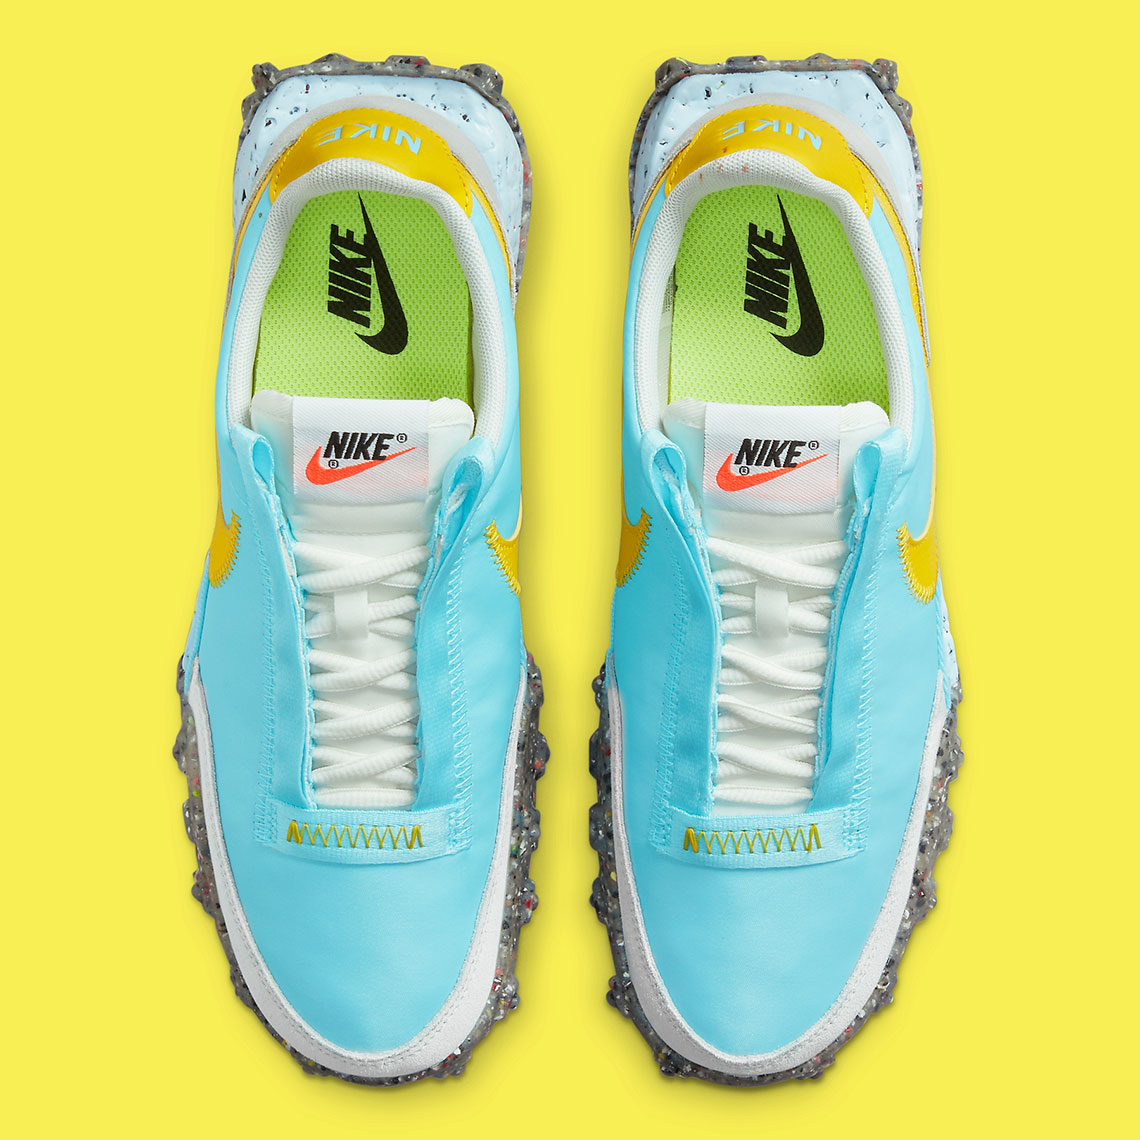 nike-waffle-racer-crater-wmns-bleached-aqua-sail-photon-dust-speed-yellow-CT1983-400-1.jpg